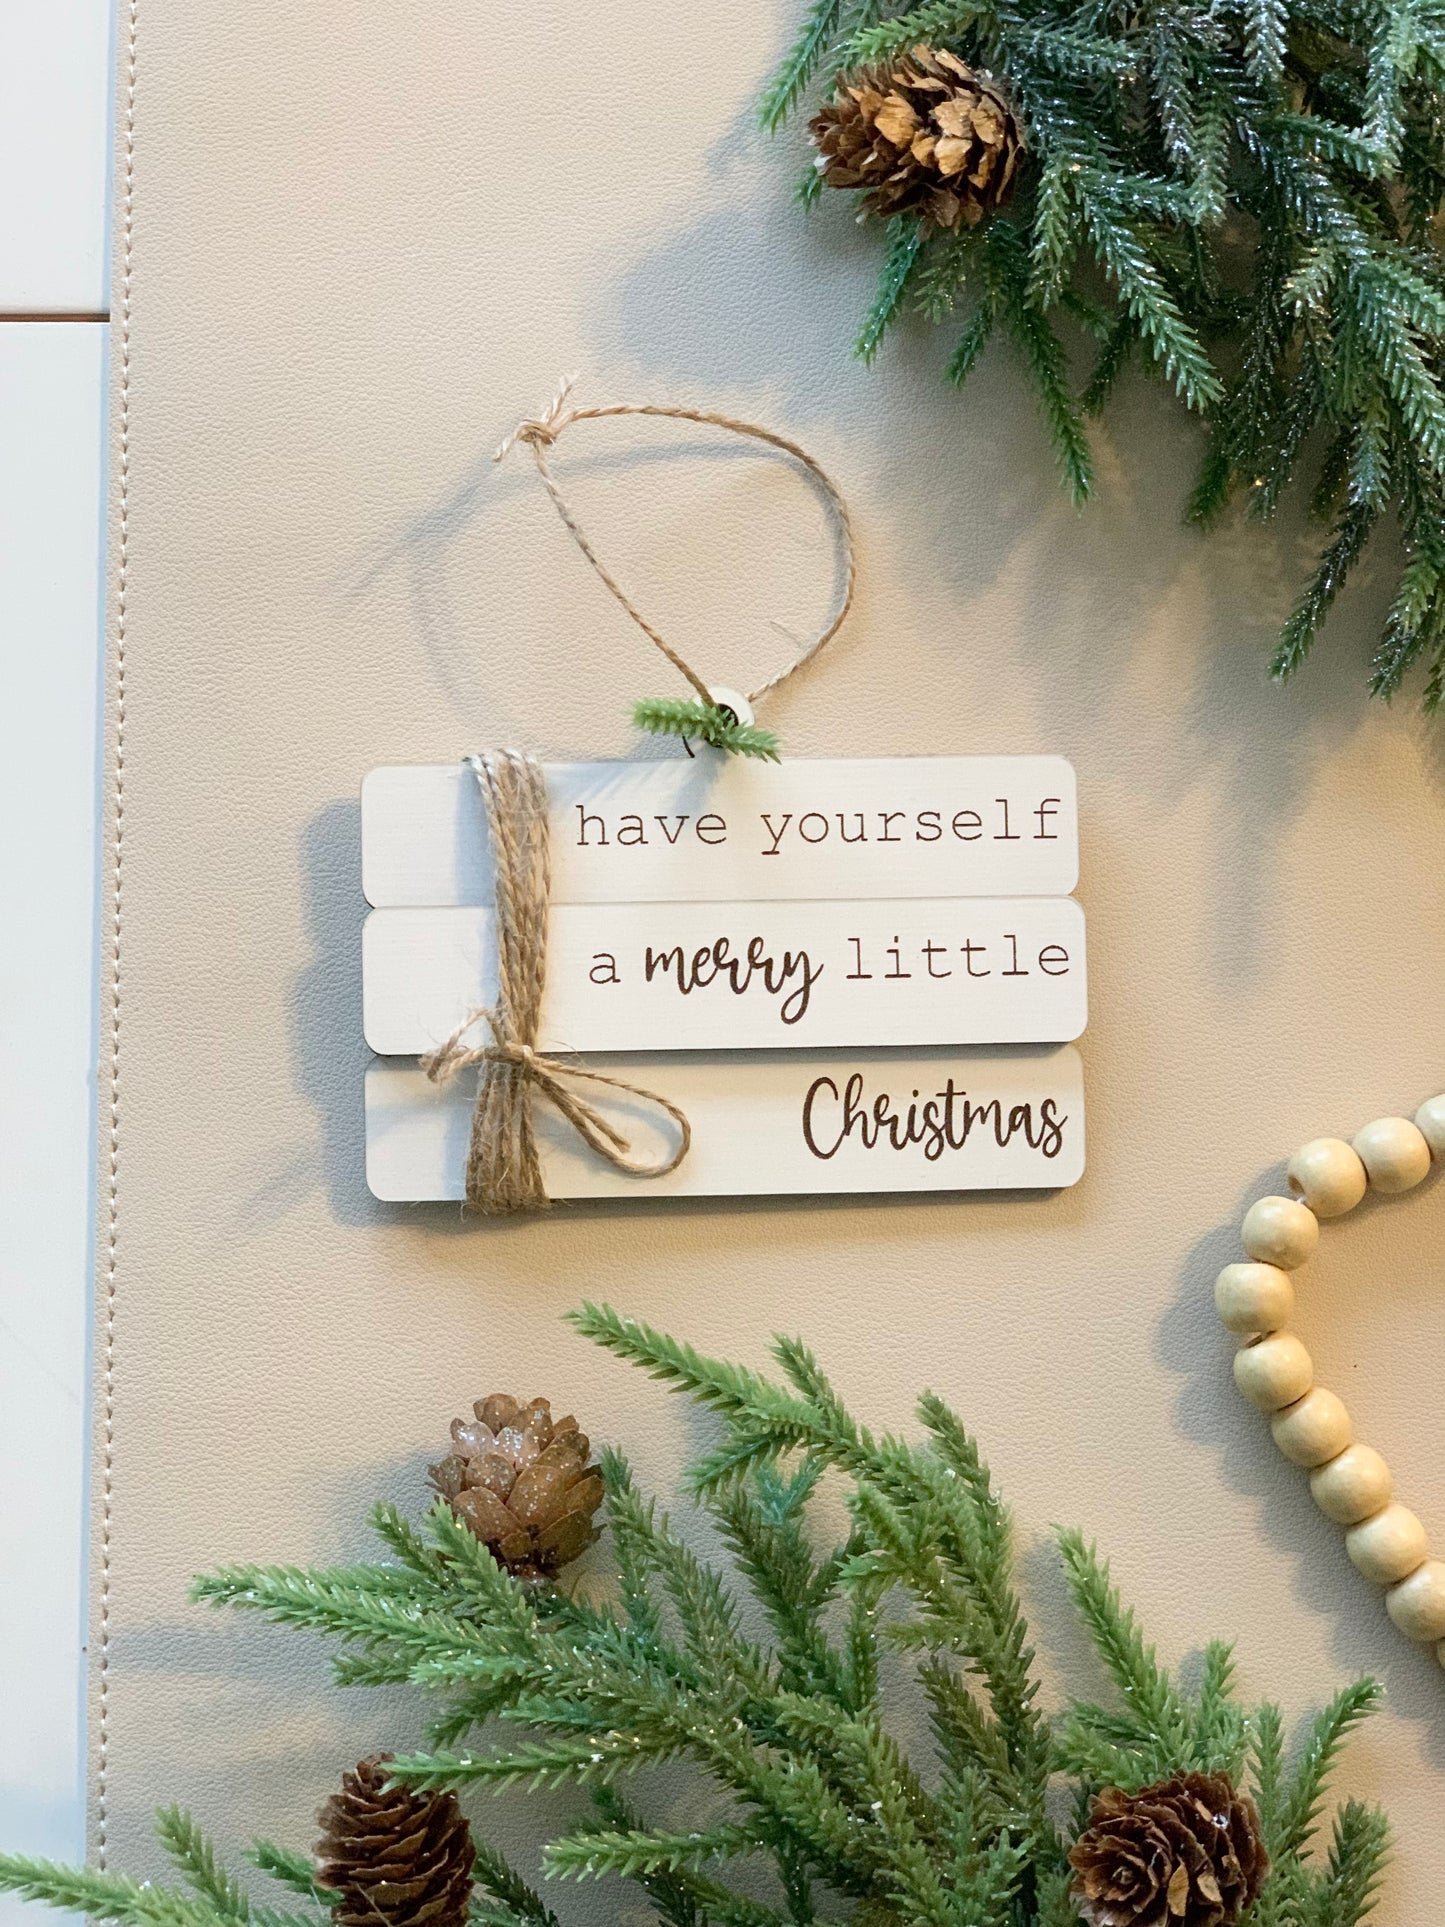 Have Yourself a Merry Little Christmas Book Stack Christmas Ornaments